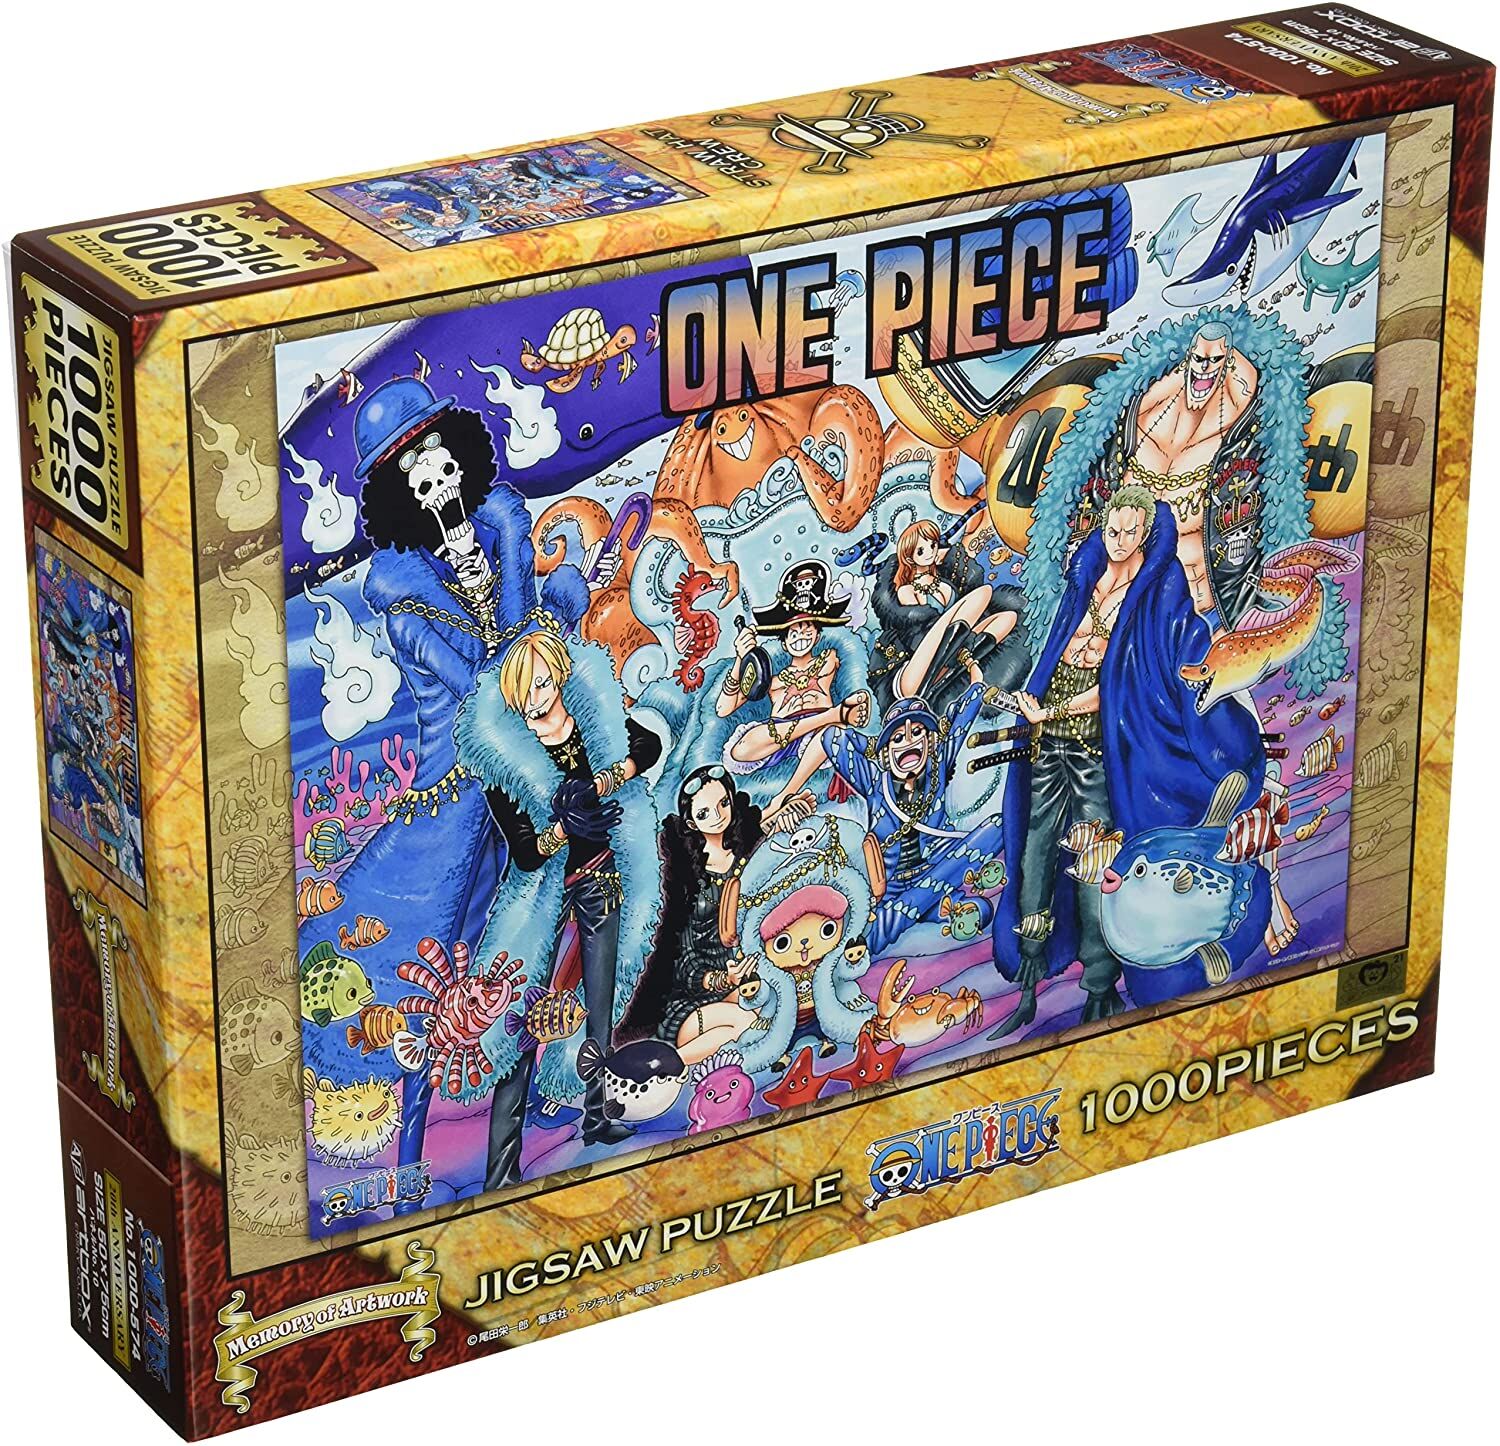 (PUZZLE) ONE PIECE Jigsaw Ensky Puzzle ONE PIECE 20th ANNIVERSARY (1000 pcs)